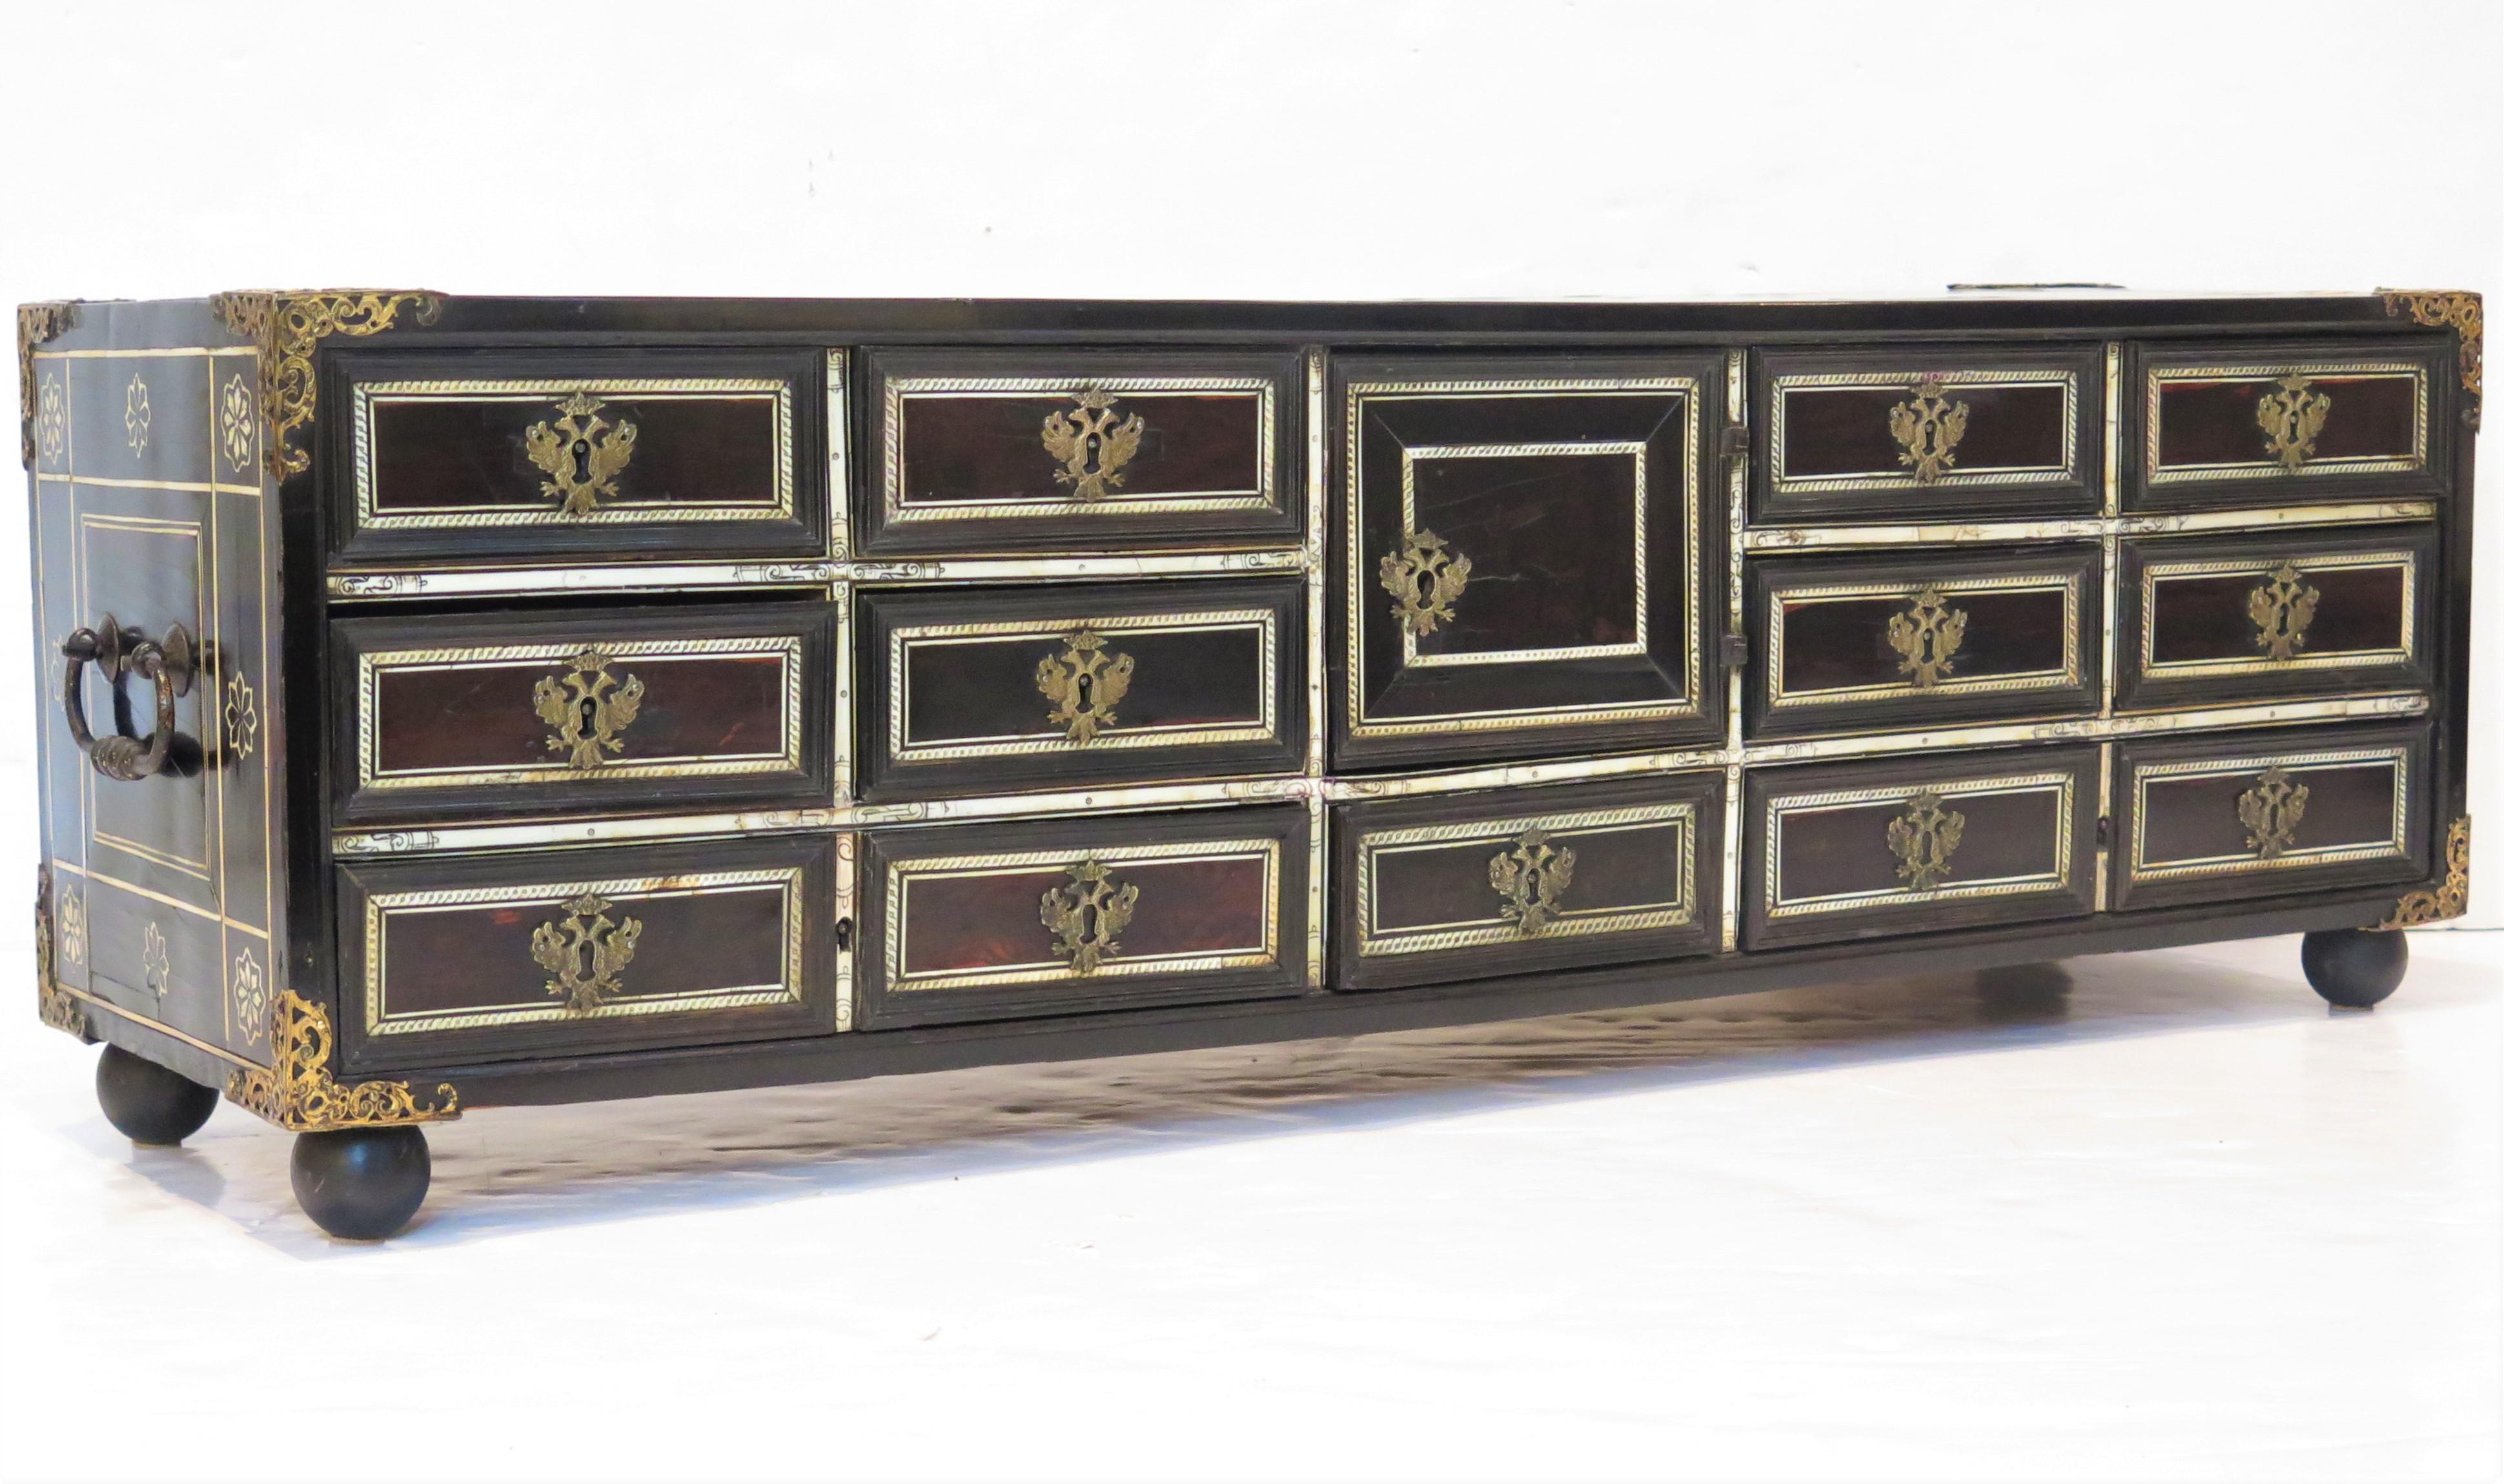 an Italian rosewood table cabinet (vargueño or papelera) with brass ornaments and inlaid incised bone decoration, there are eleven drawers (two bottom drawers are double width and appear to be four drawers) and one central cabinet door, it is